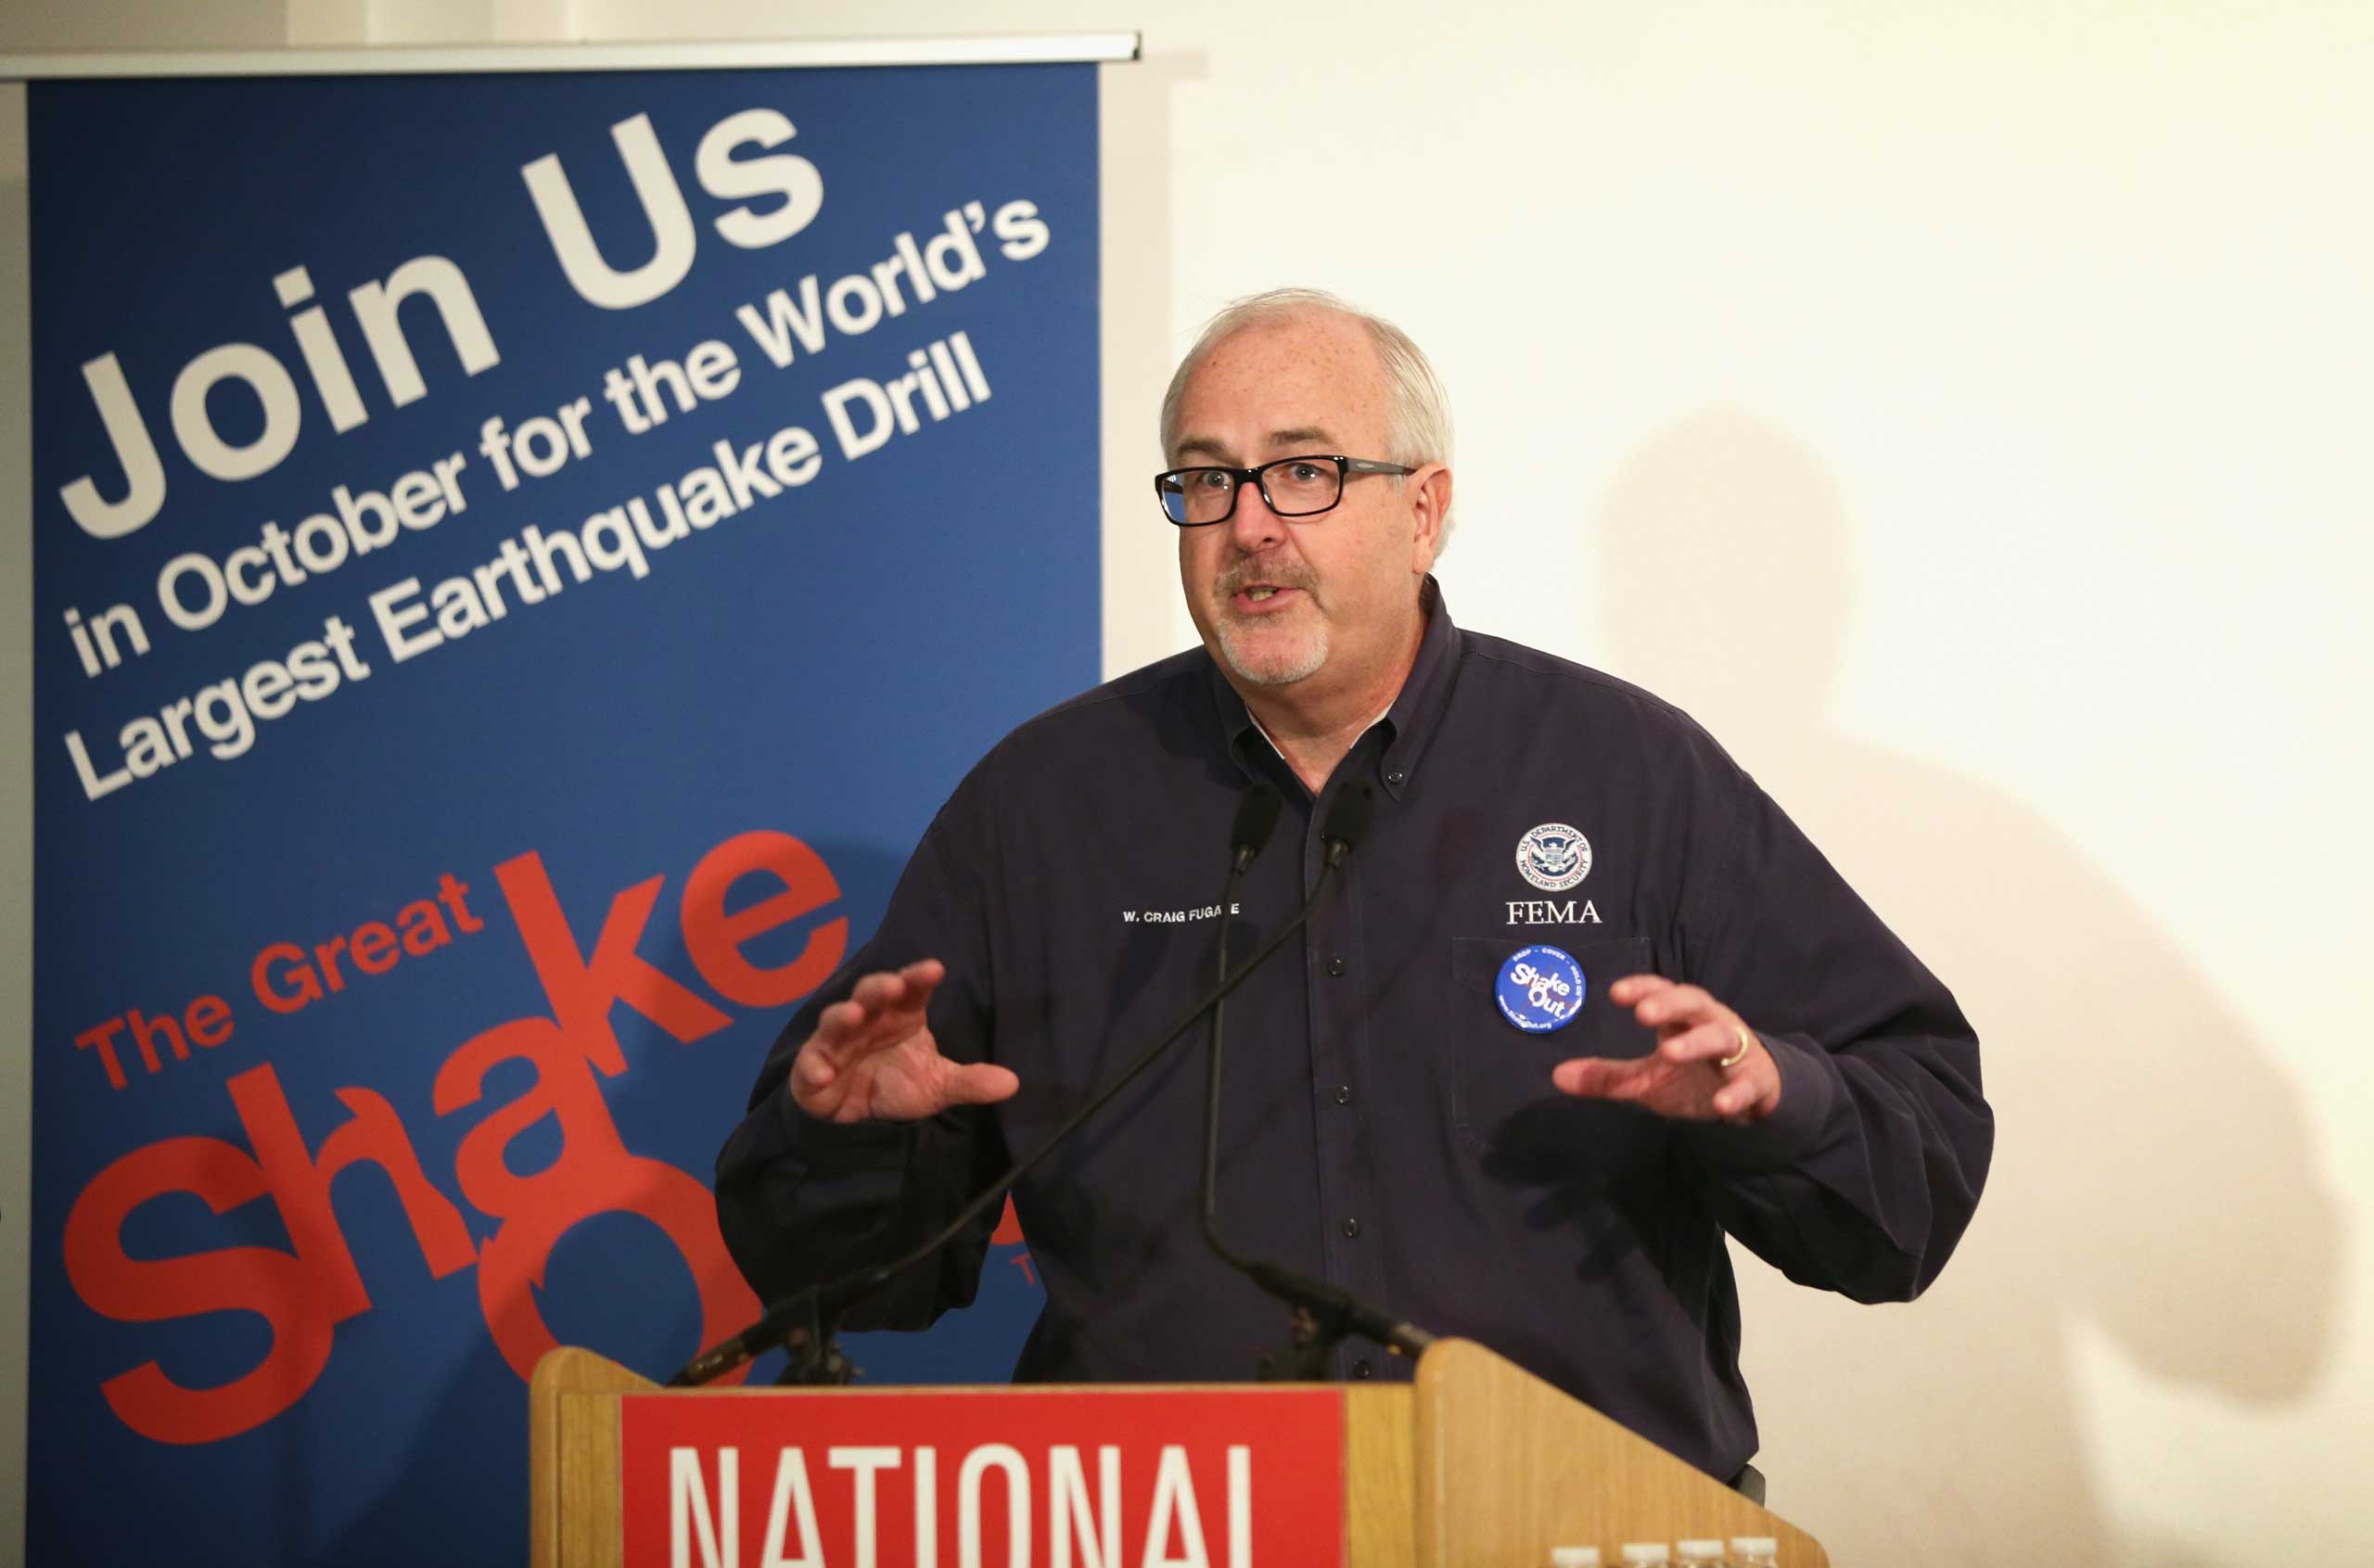 Federal Emergency Management Agency Administrator Craig Fugate speaks during an event on earthquake preparedness Oct. 14, 2014 at the National Building Museum in Washington, DC. (Alex Wong—Getty Images)